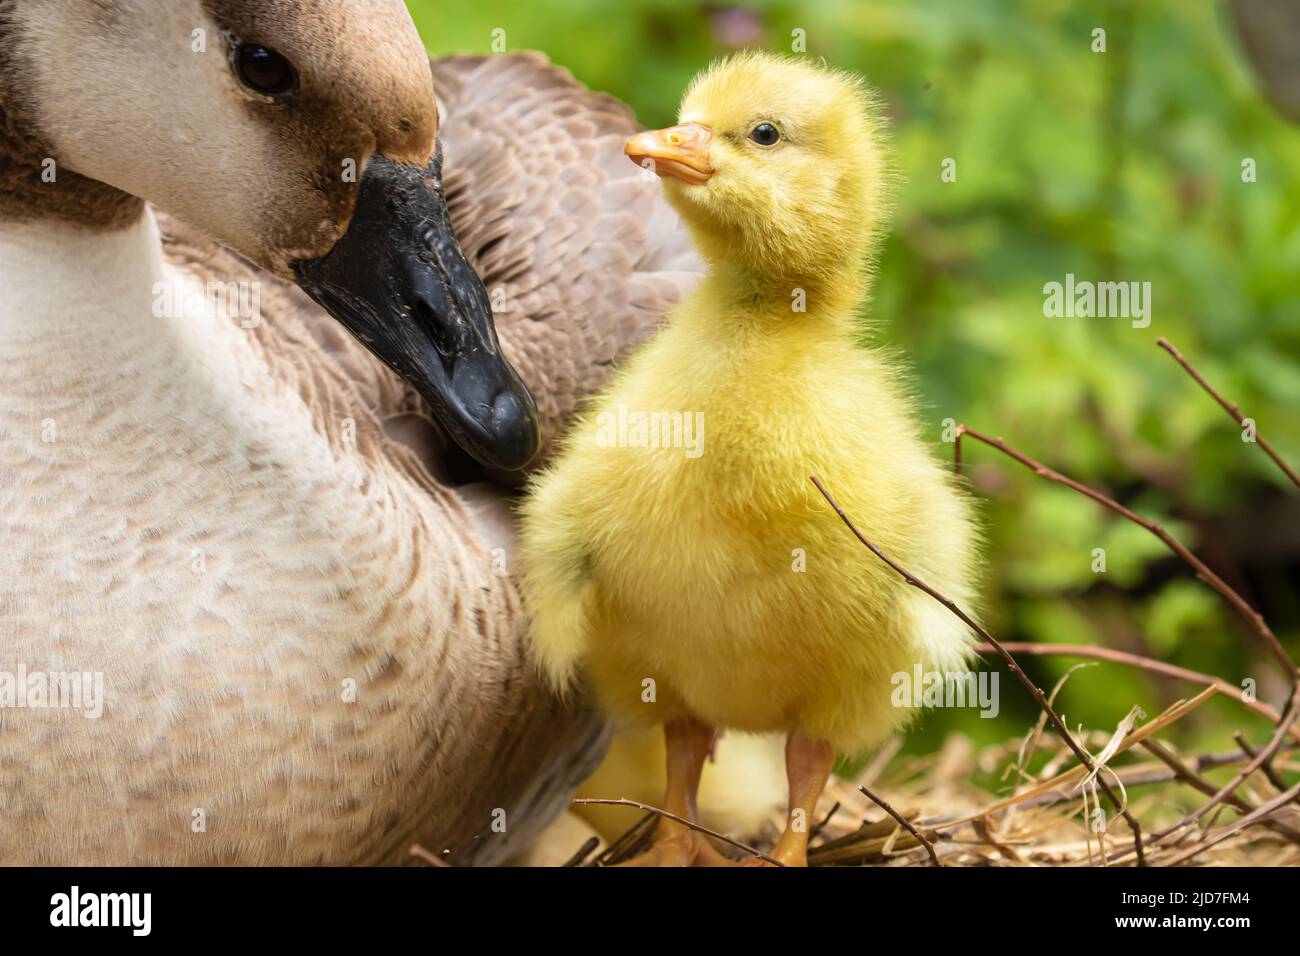 Gosling is a specialized term for a young baby goose, typically still covered with soft, fluffy down feathers and unable to fly. Stock Photo